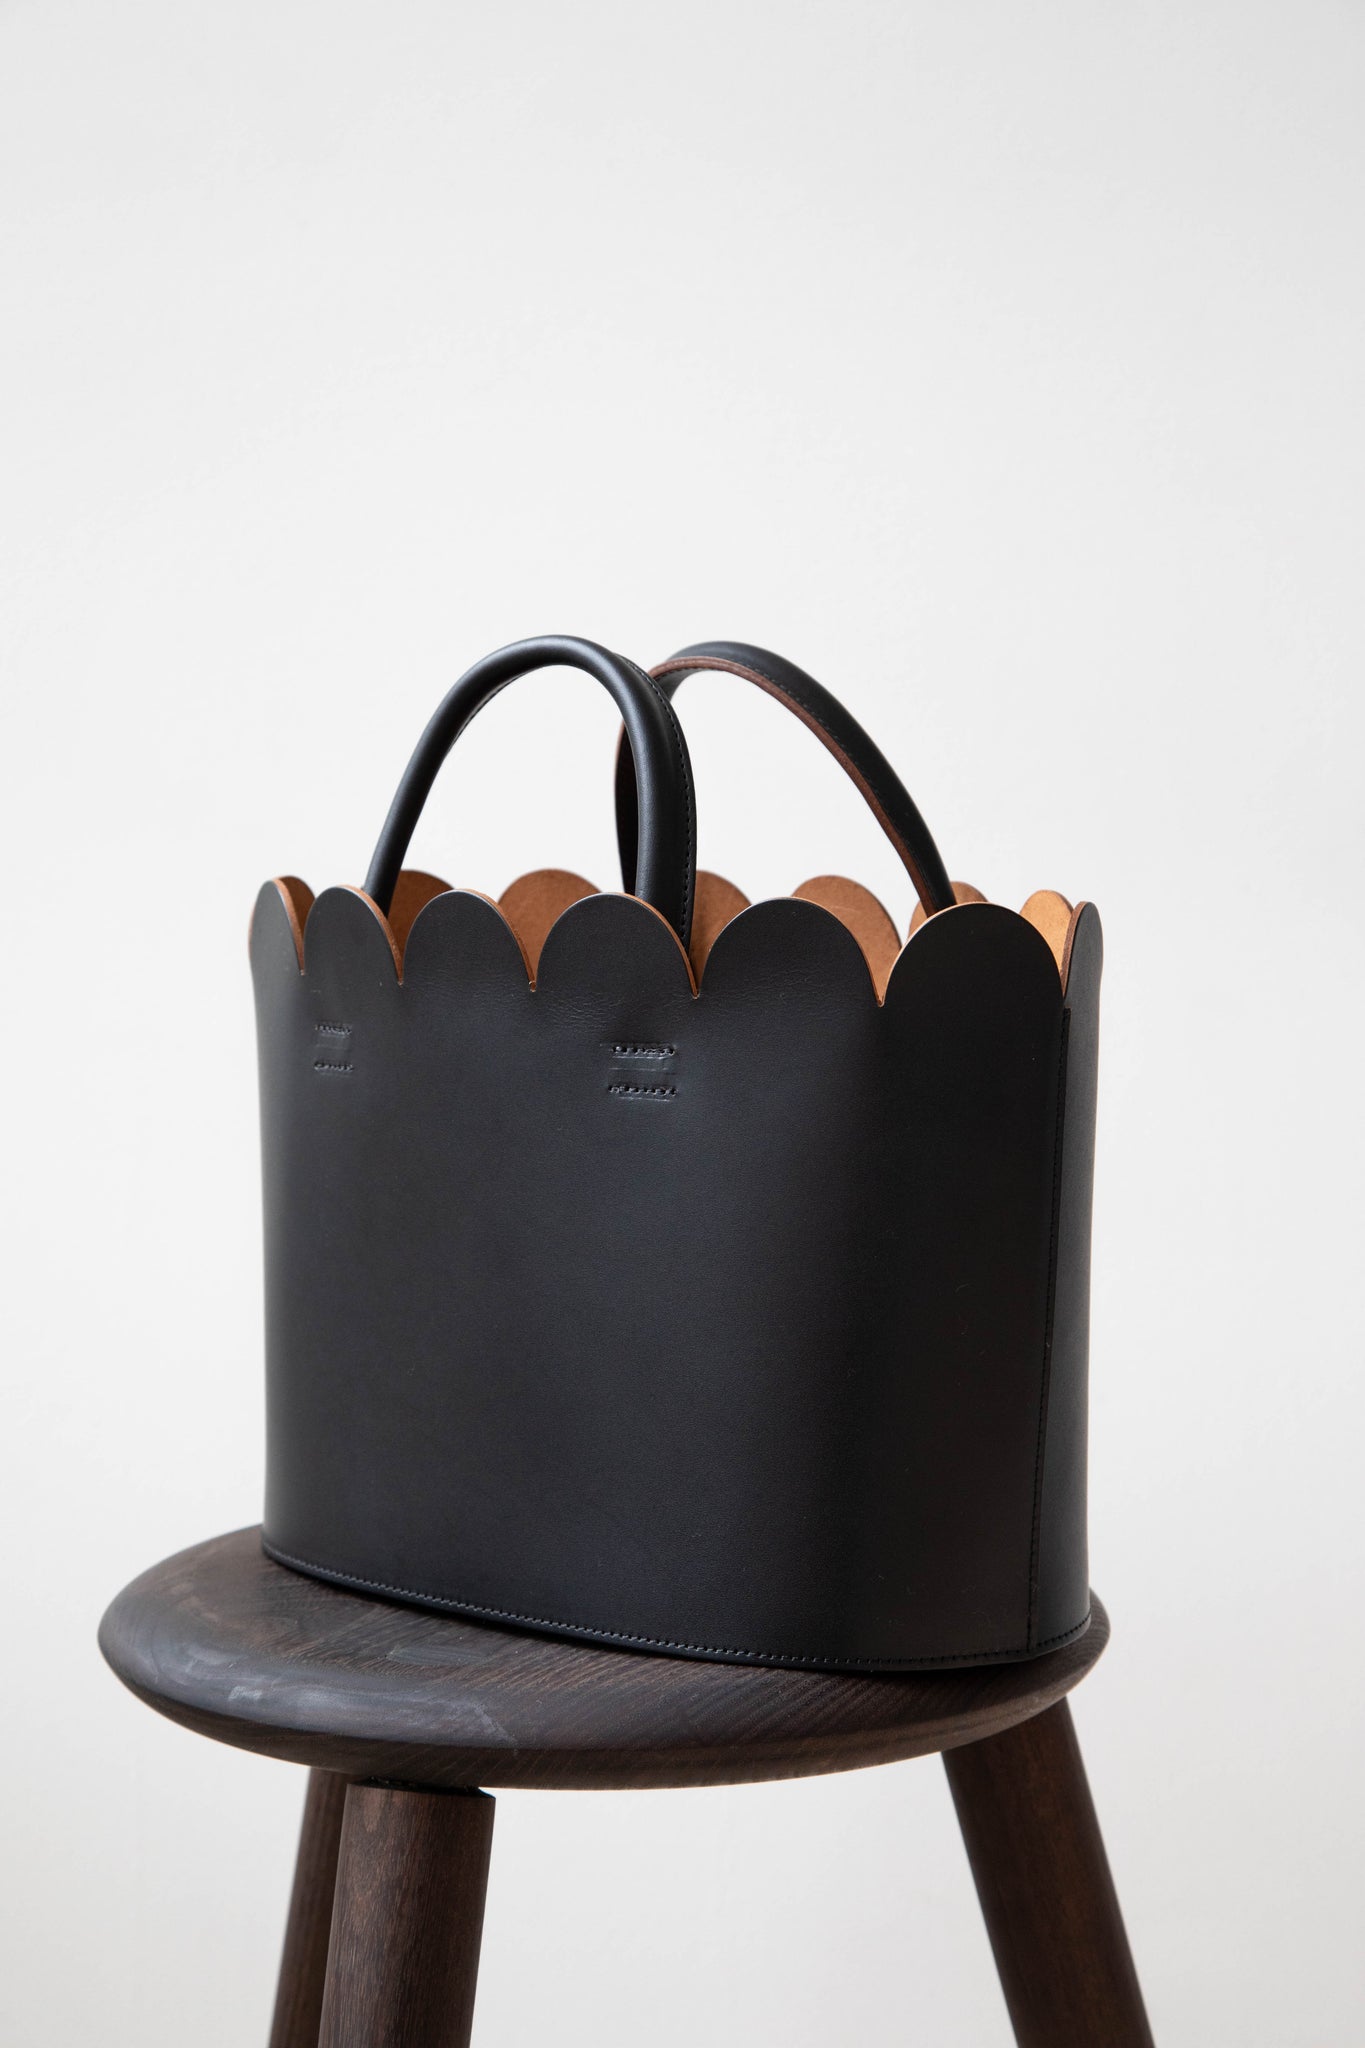 Old Man's Tailor Scalloped Leather Basket Tote